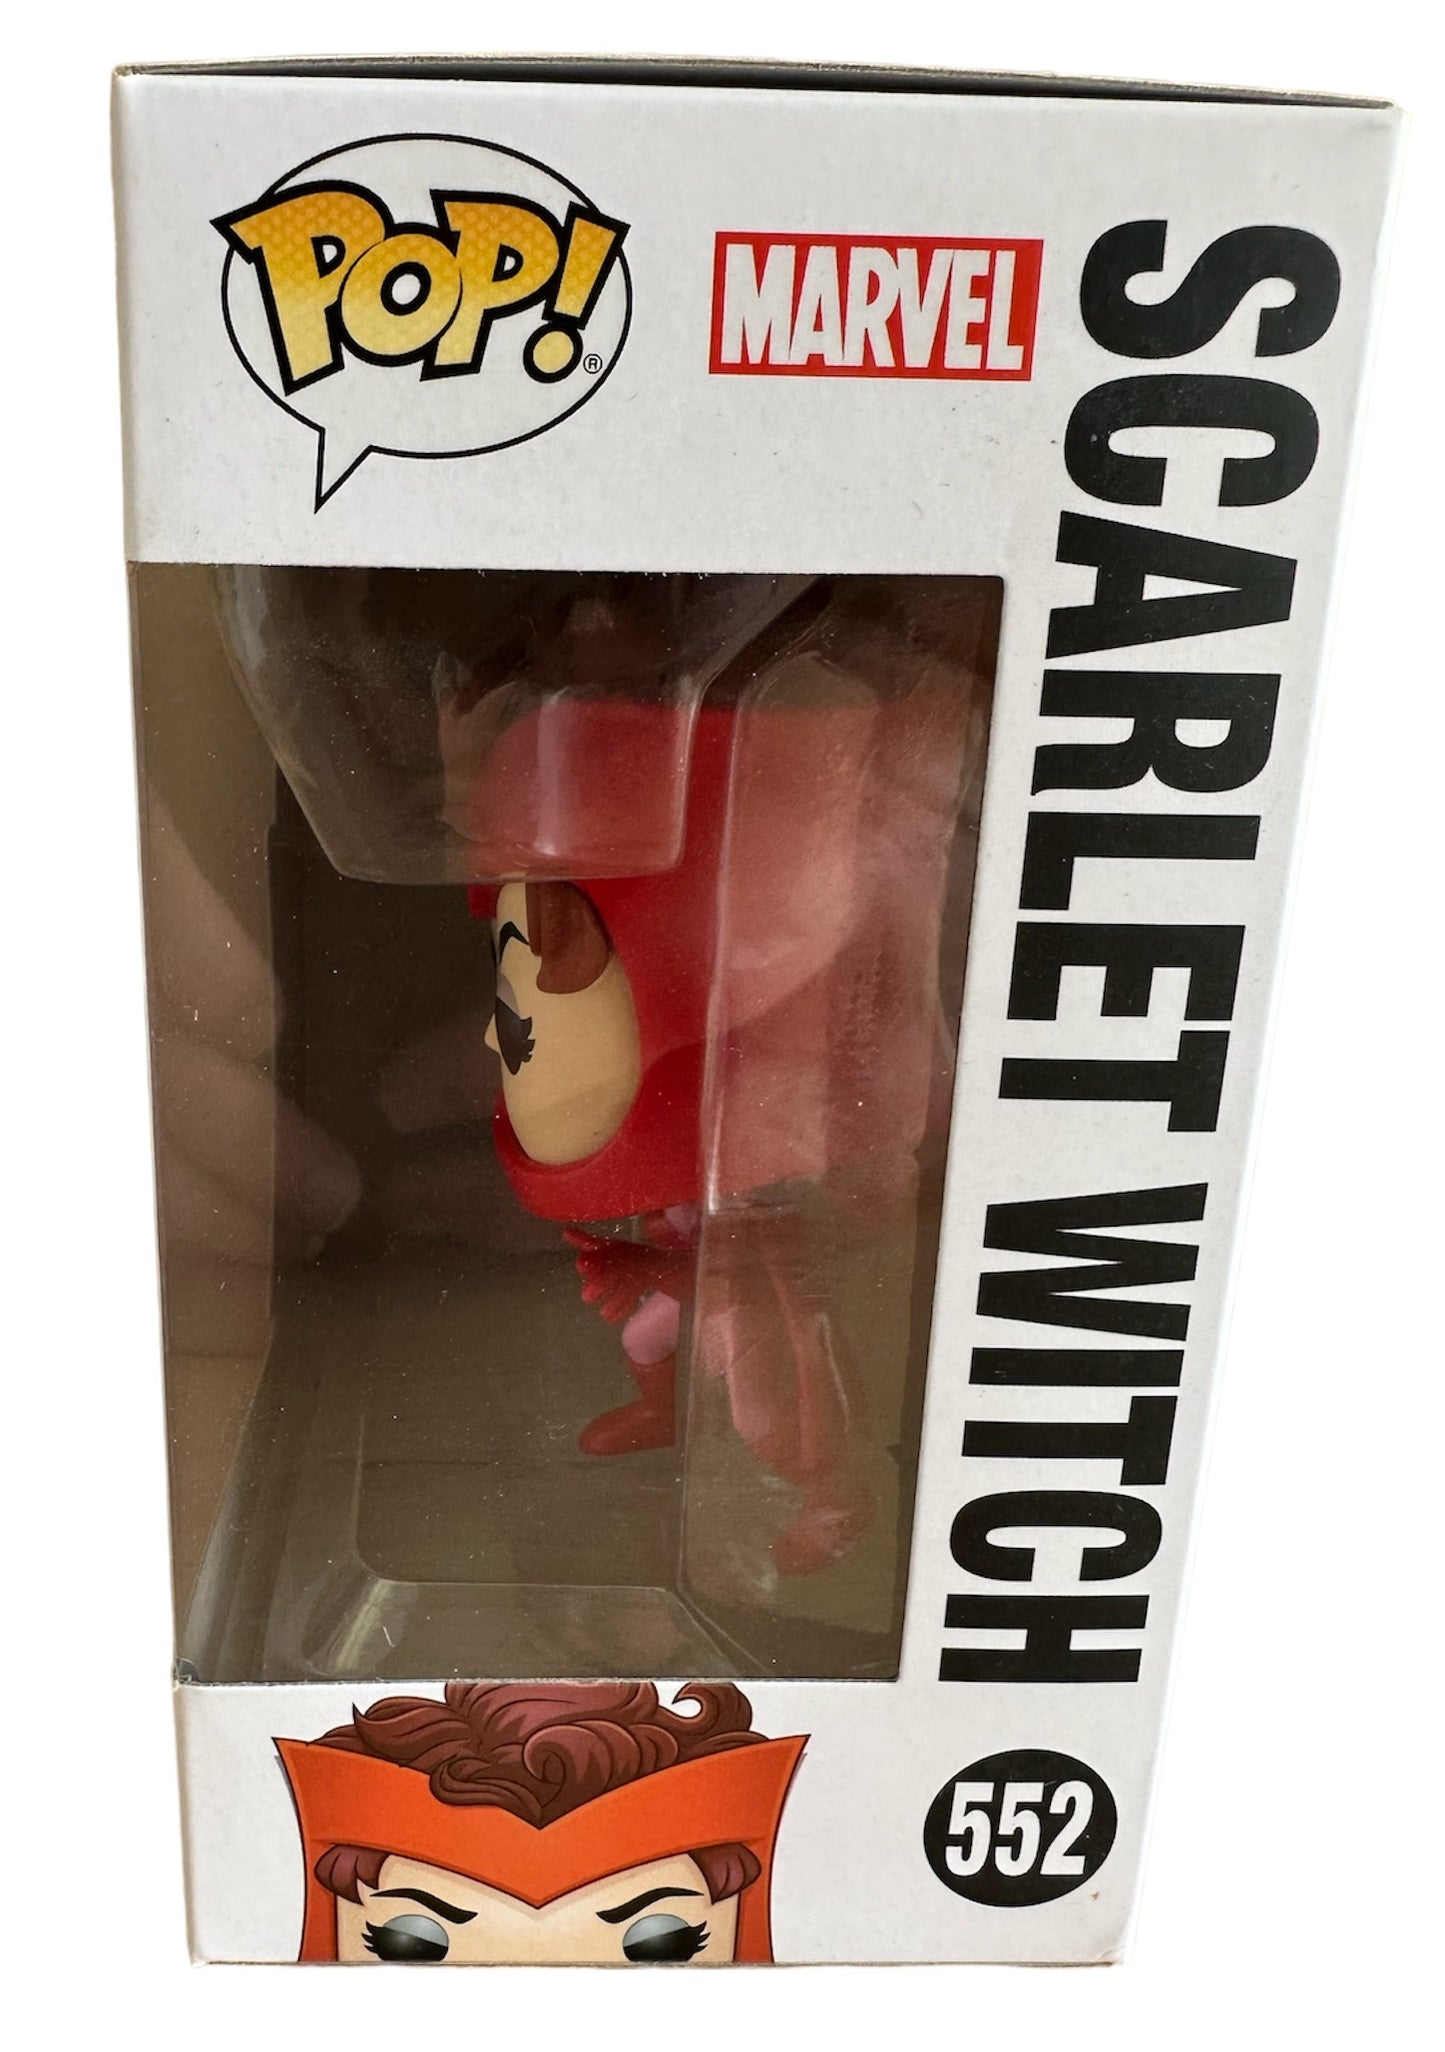 POP! 2019 Marvels 80 Years First Appearance Funko Pop Vinyl Figure - Scarlet Witch Bobble-Head No. 552 - Brand New Shop Stock Room Find